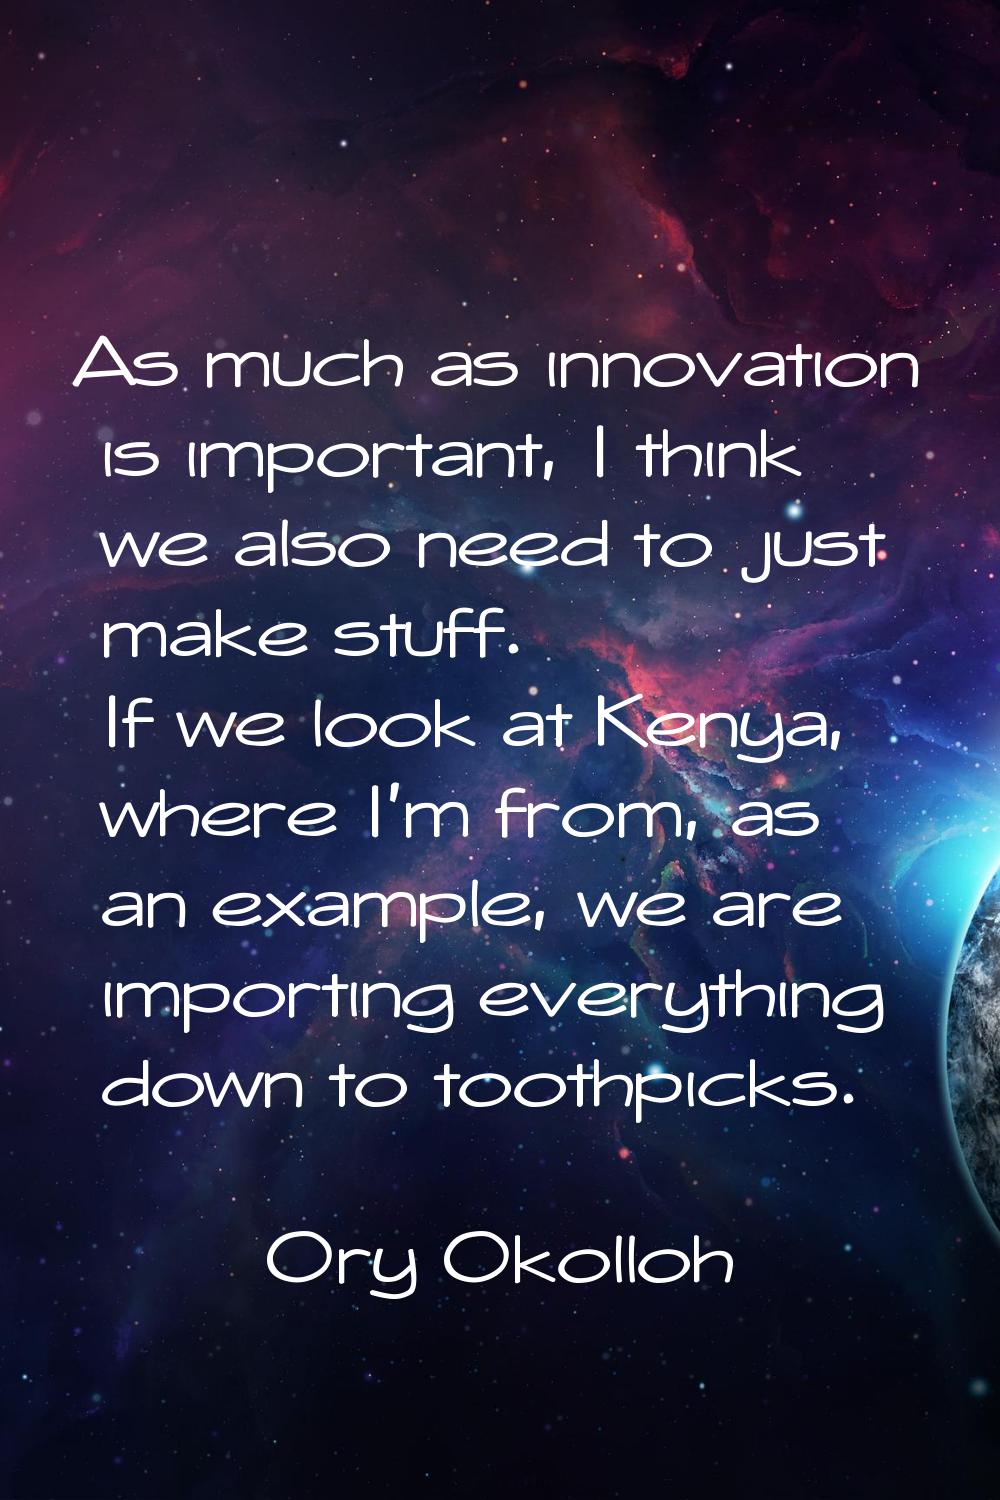 As much as innovation is important, I think we also need to just make stuff. If we look at Kenya, w